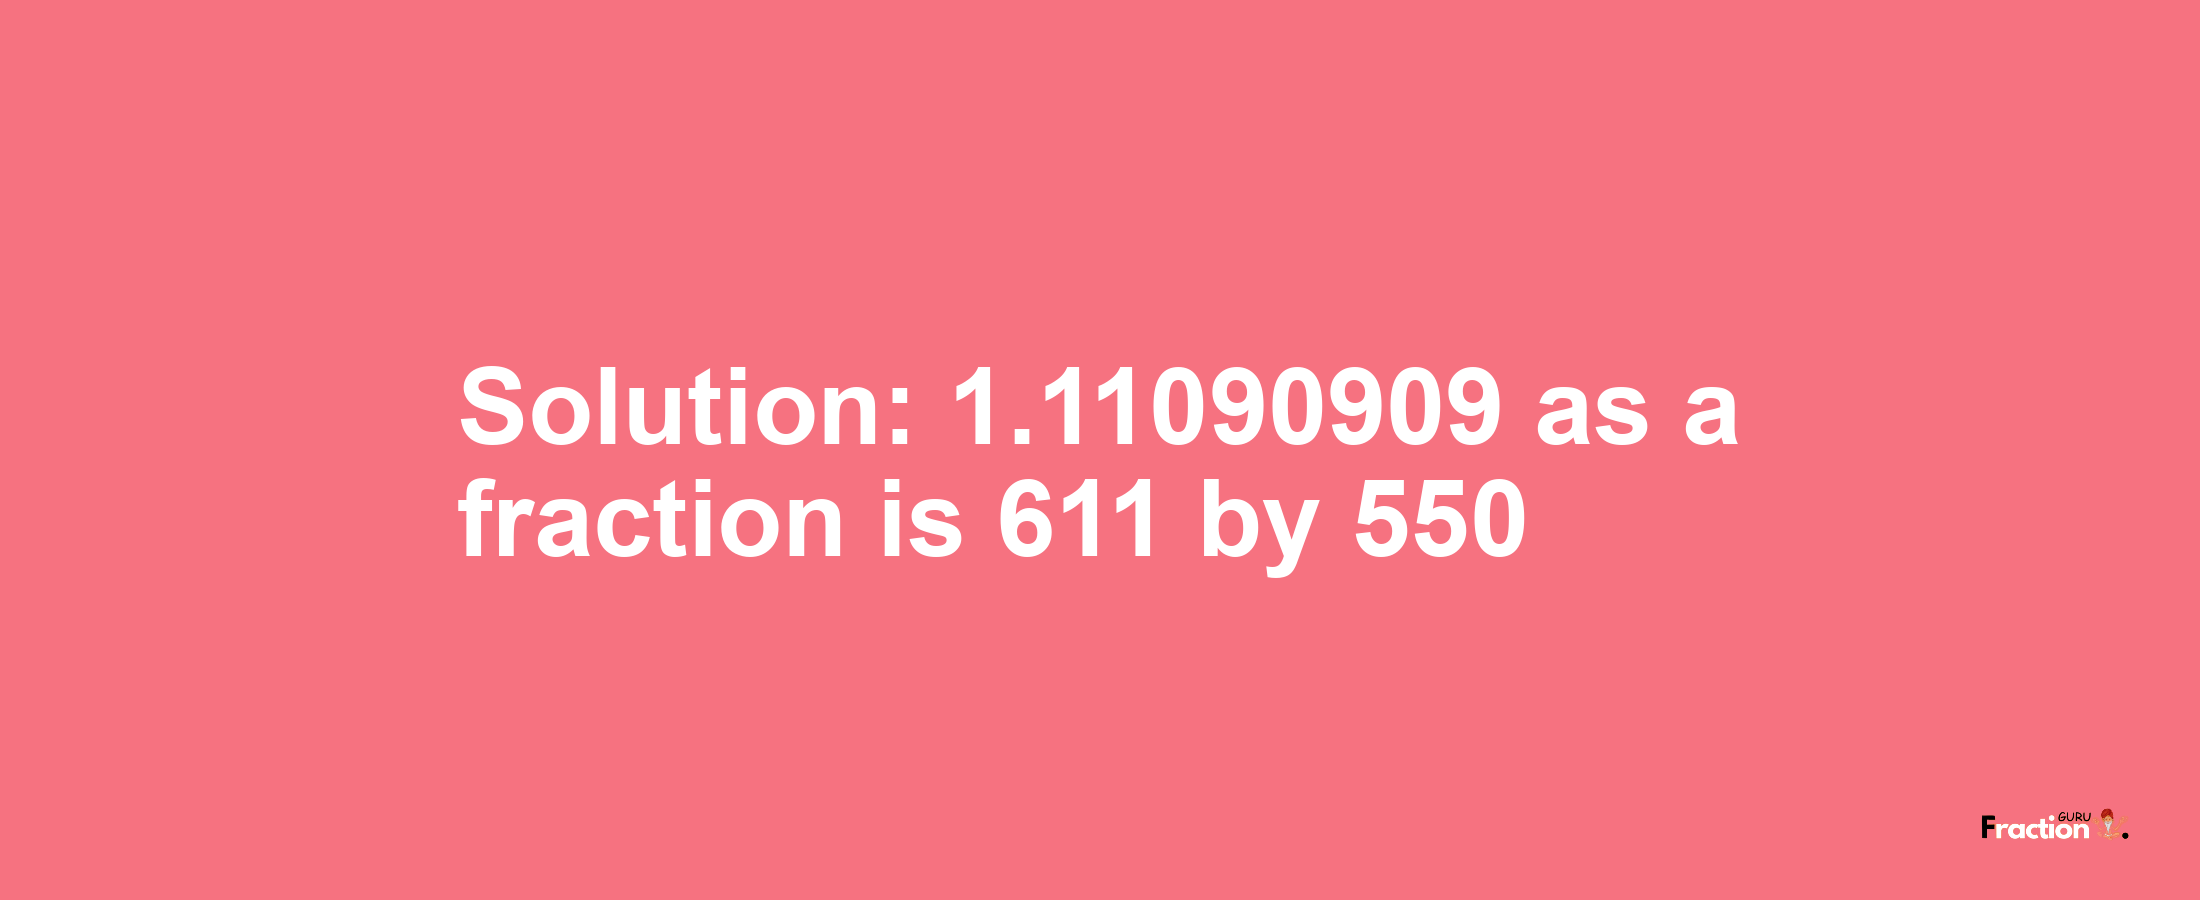 Solution:1.11090909 as a fraction is 611/550